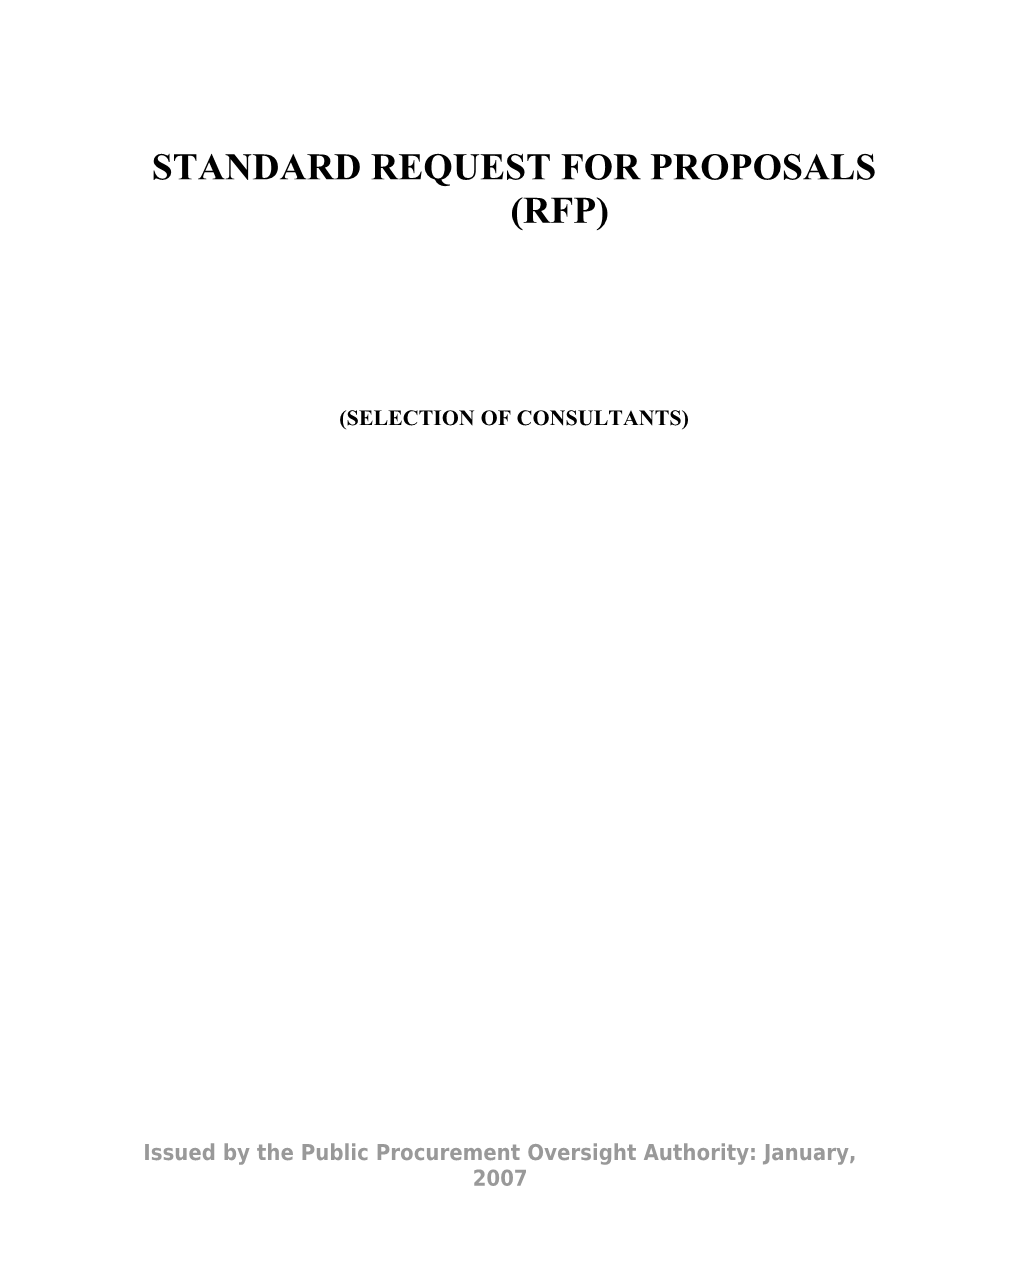 Standard Request for Proposals (Rfp)